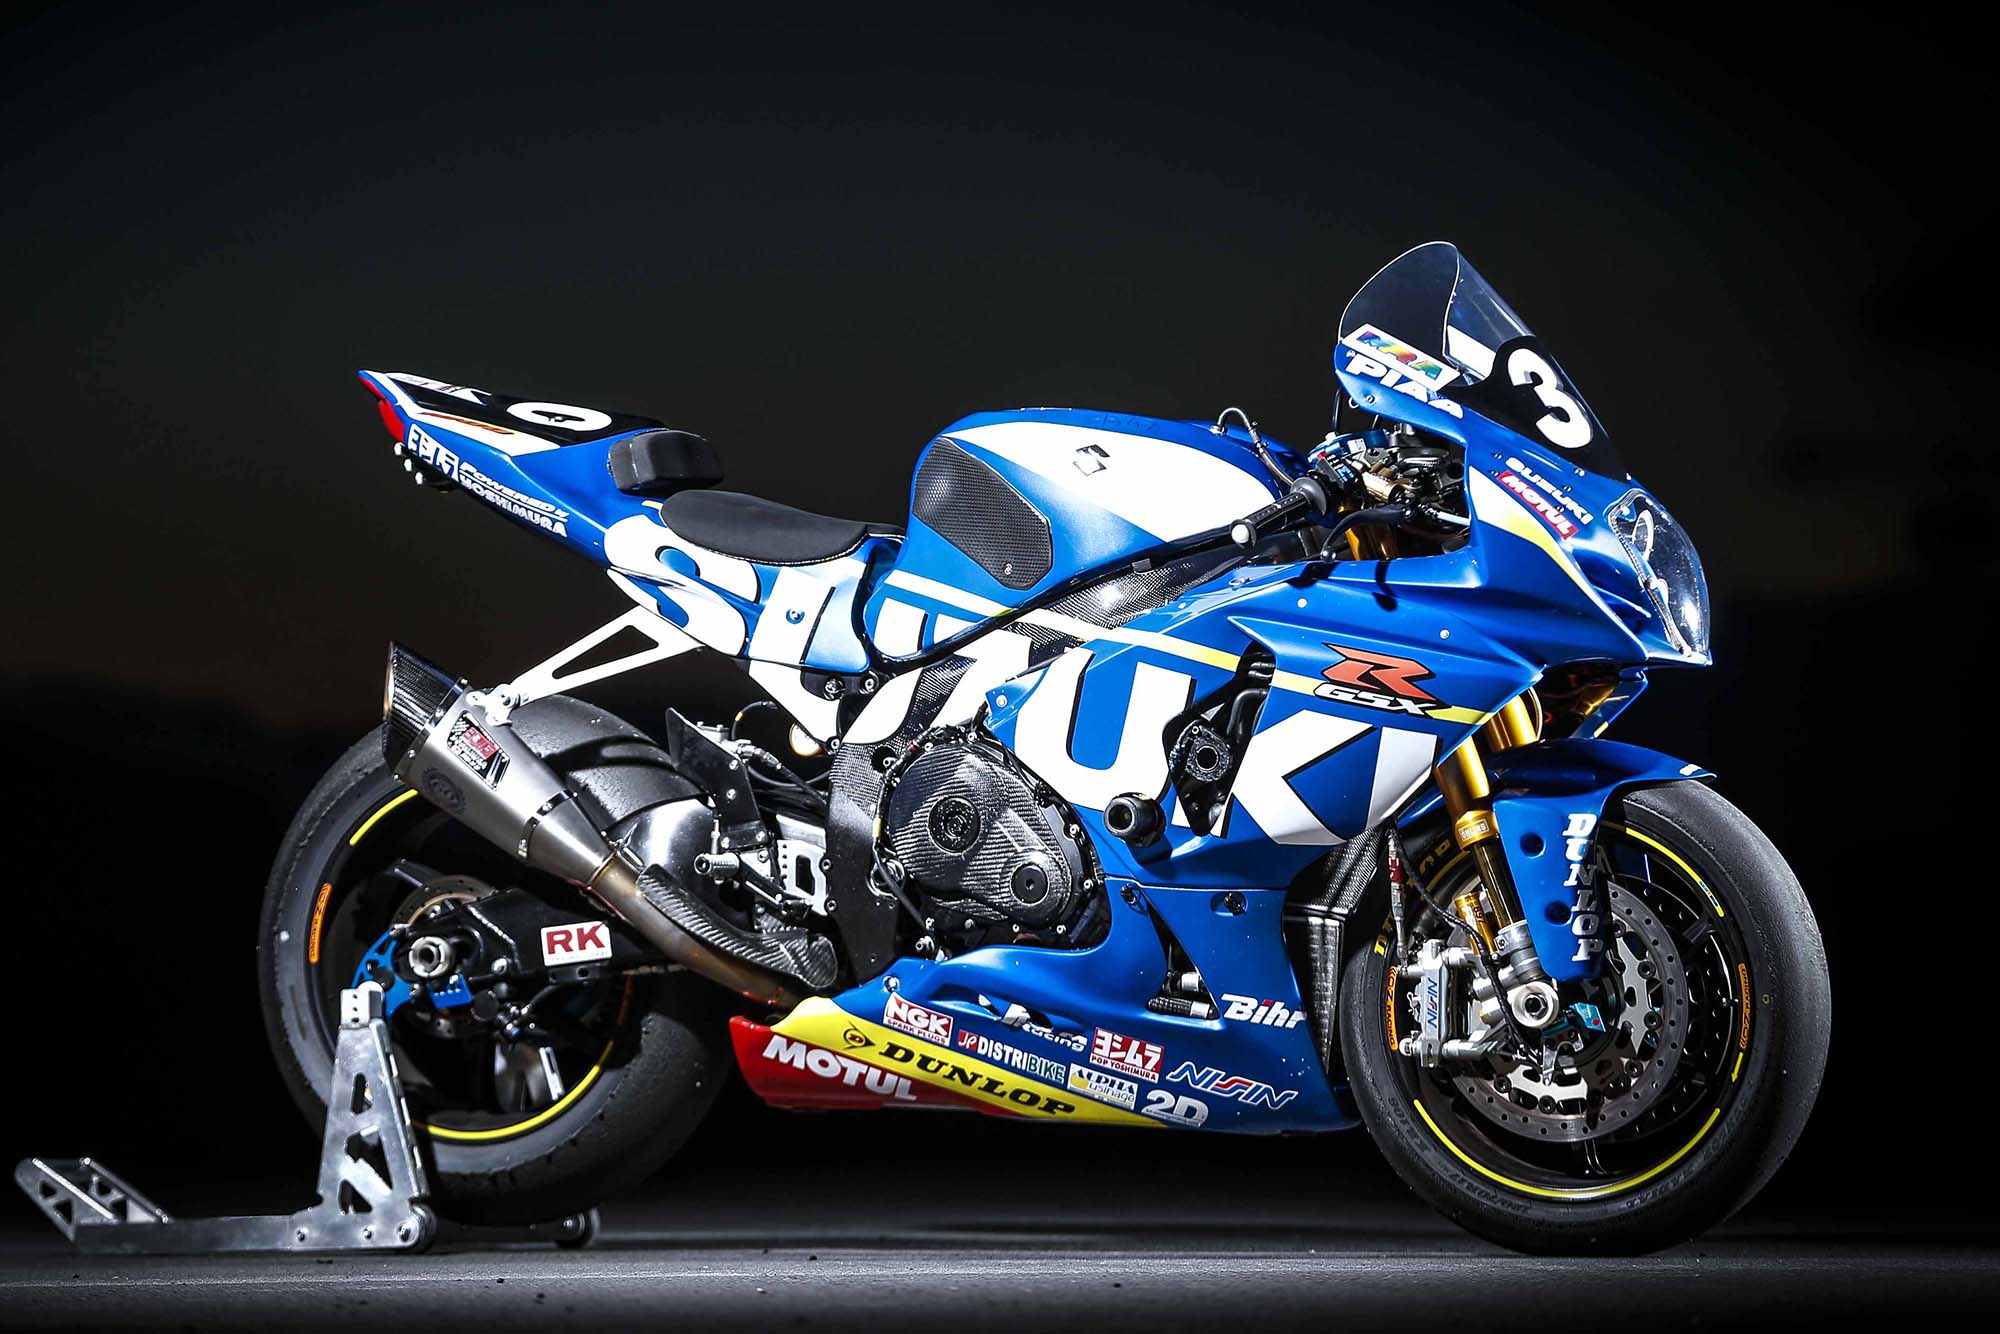 Gsxr 1000 Wallpapers